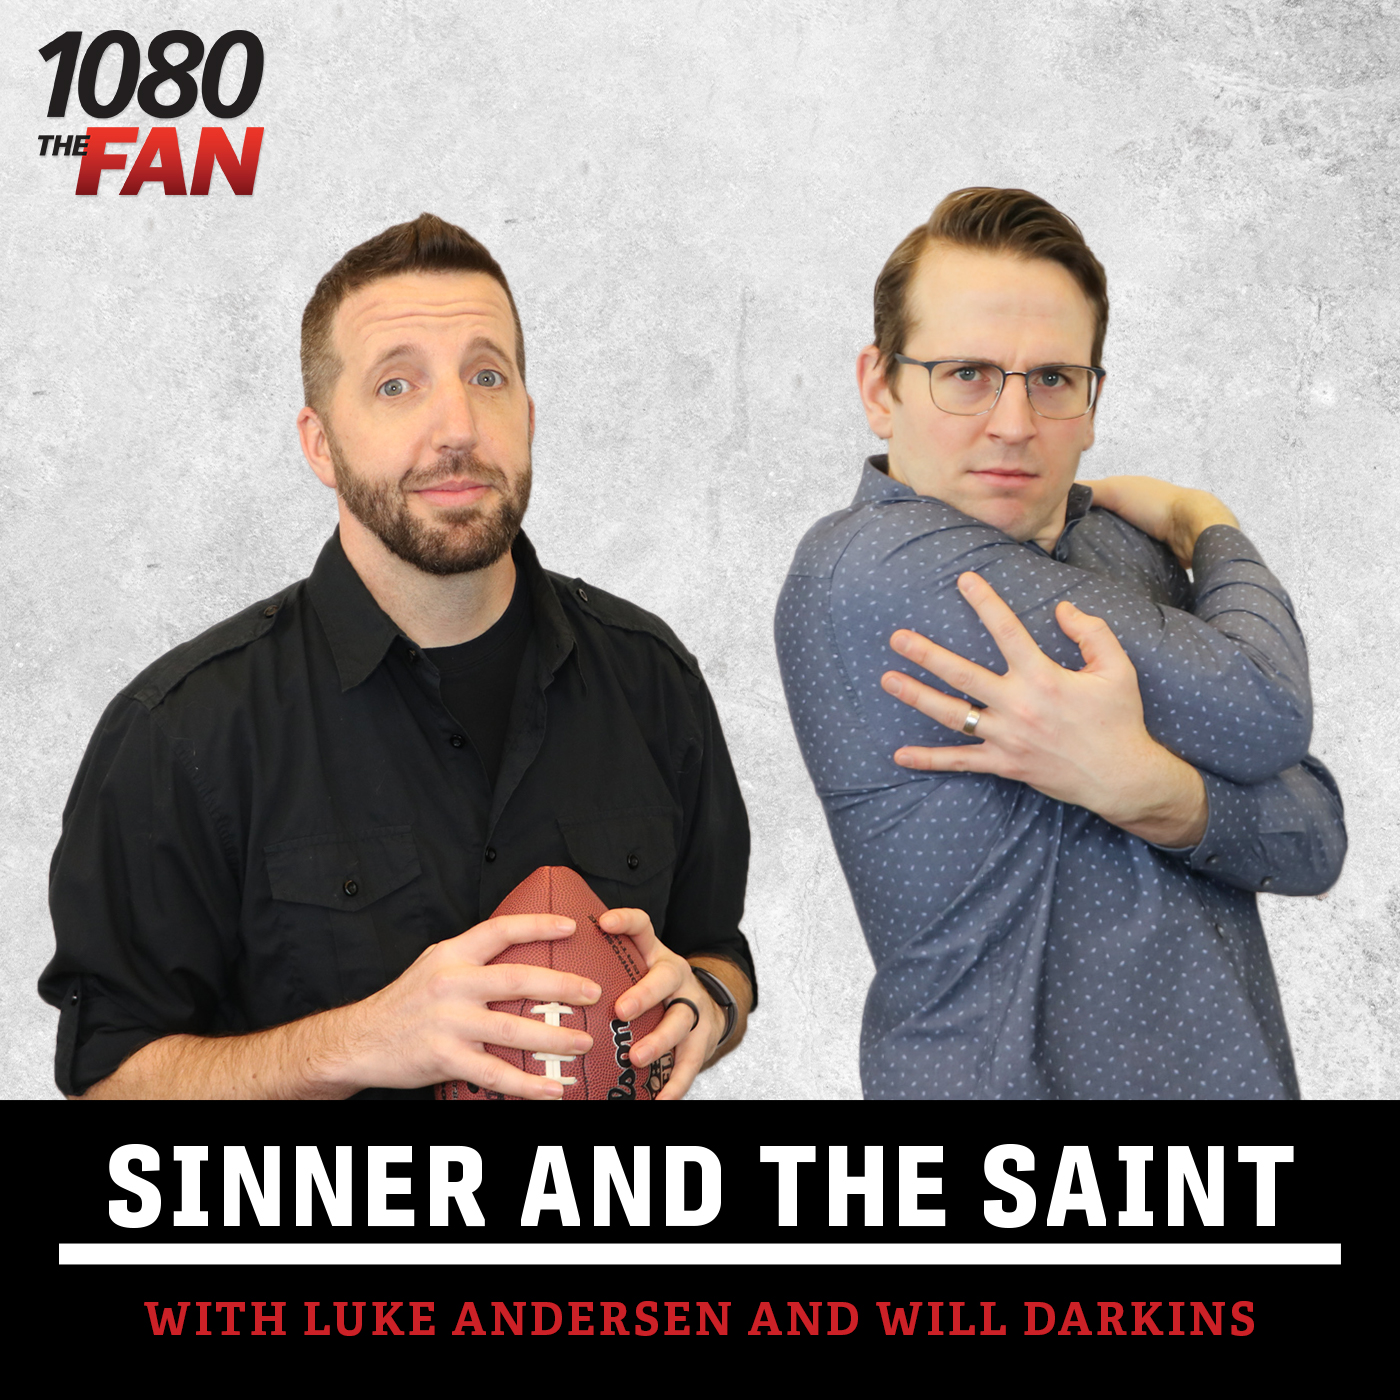 The Sinner and The Saint